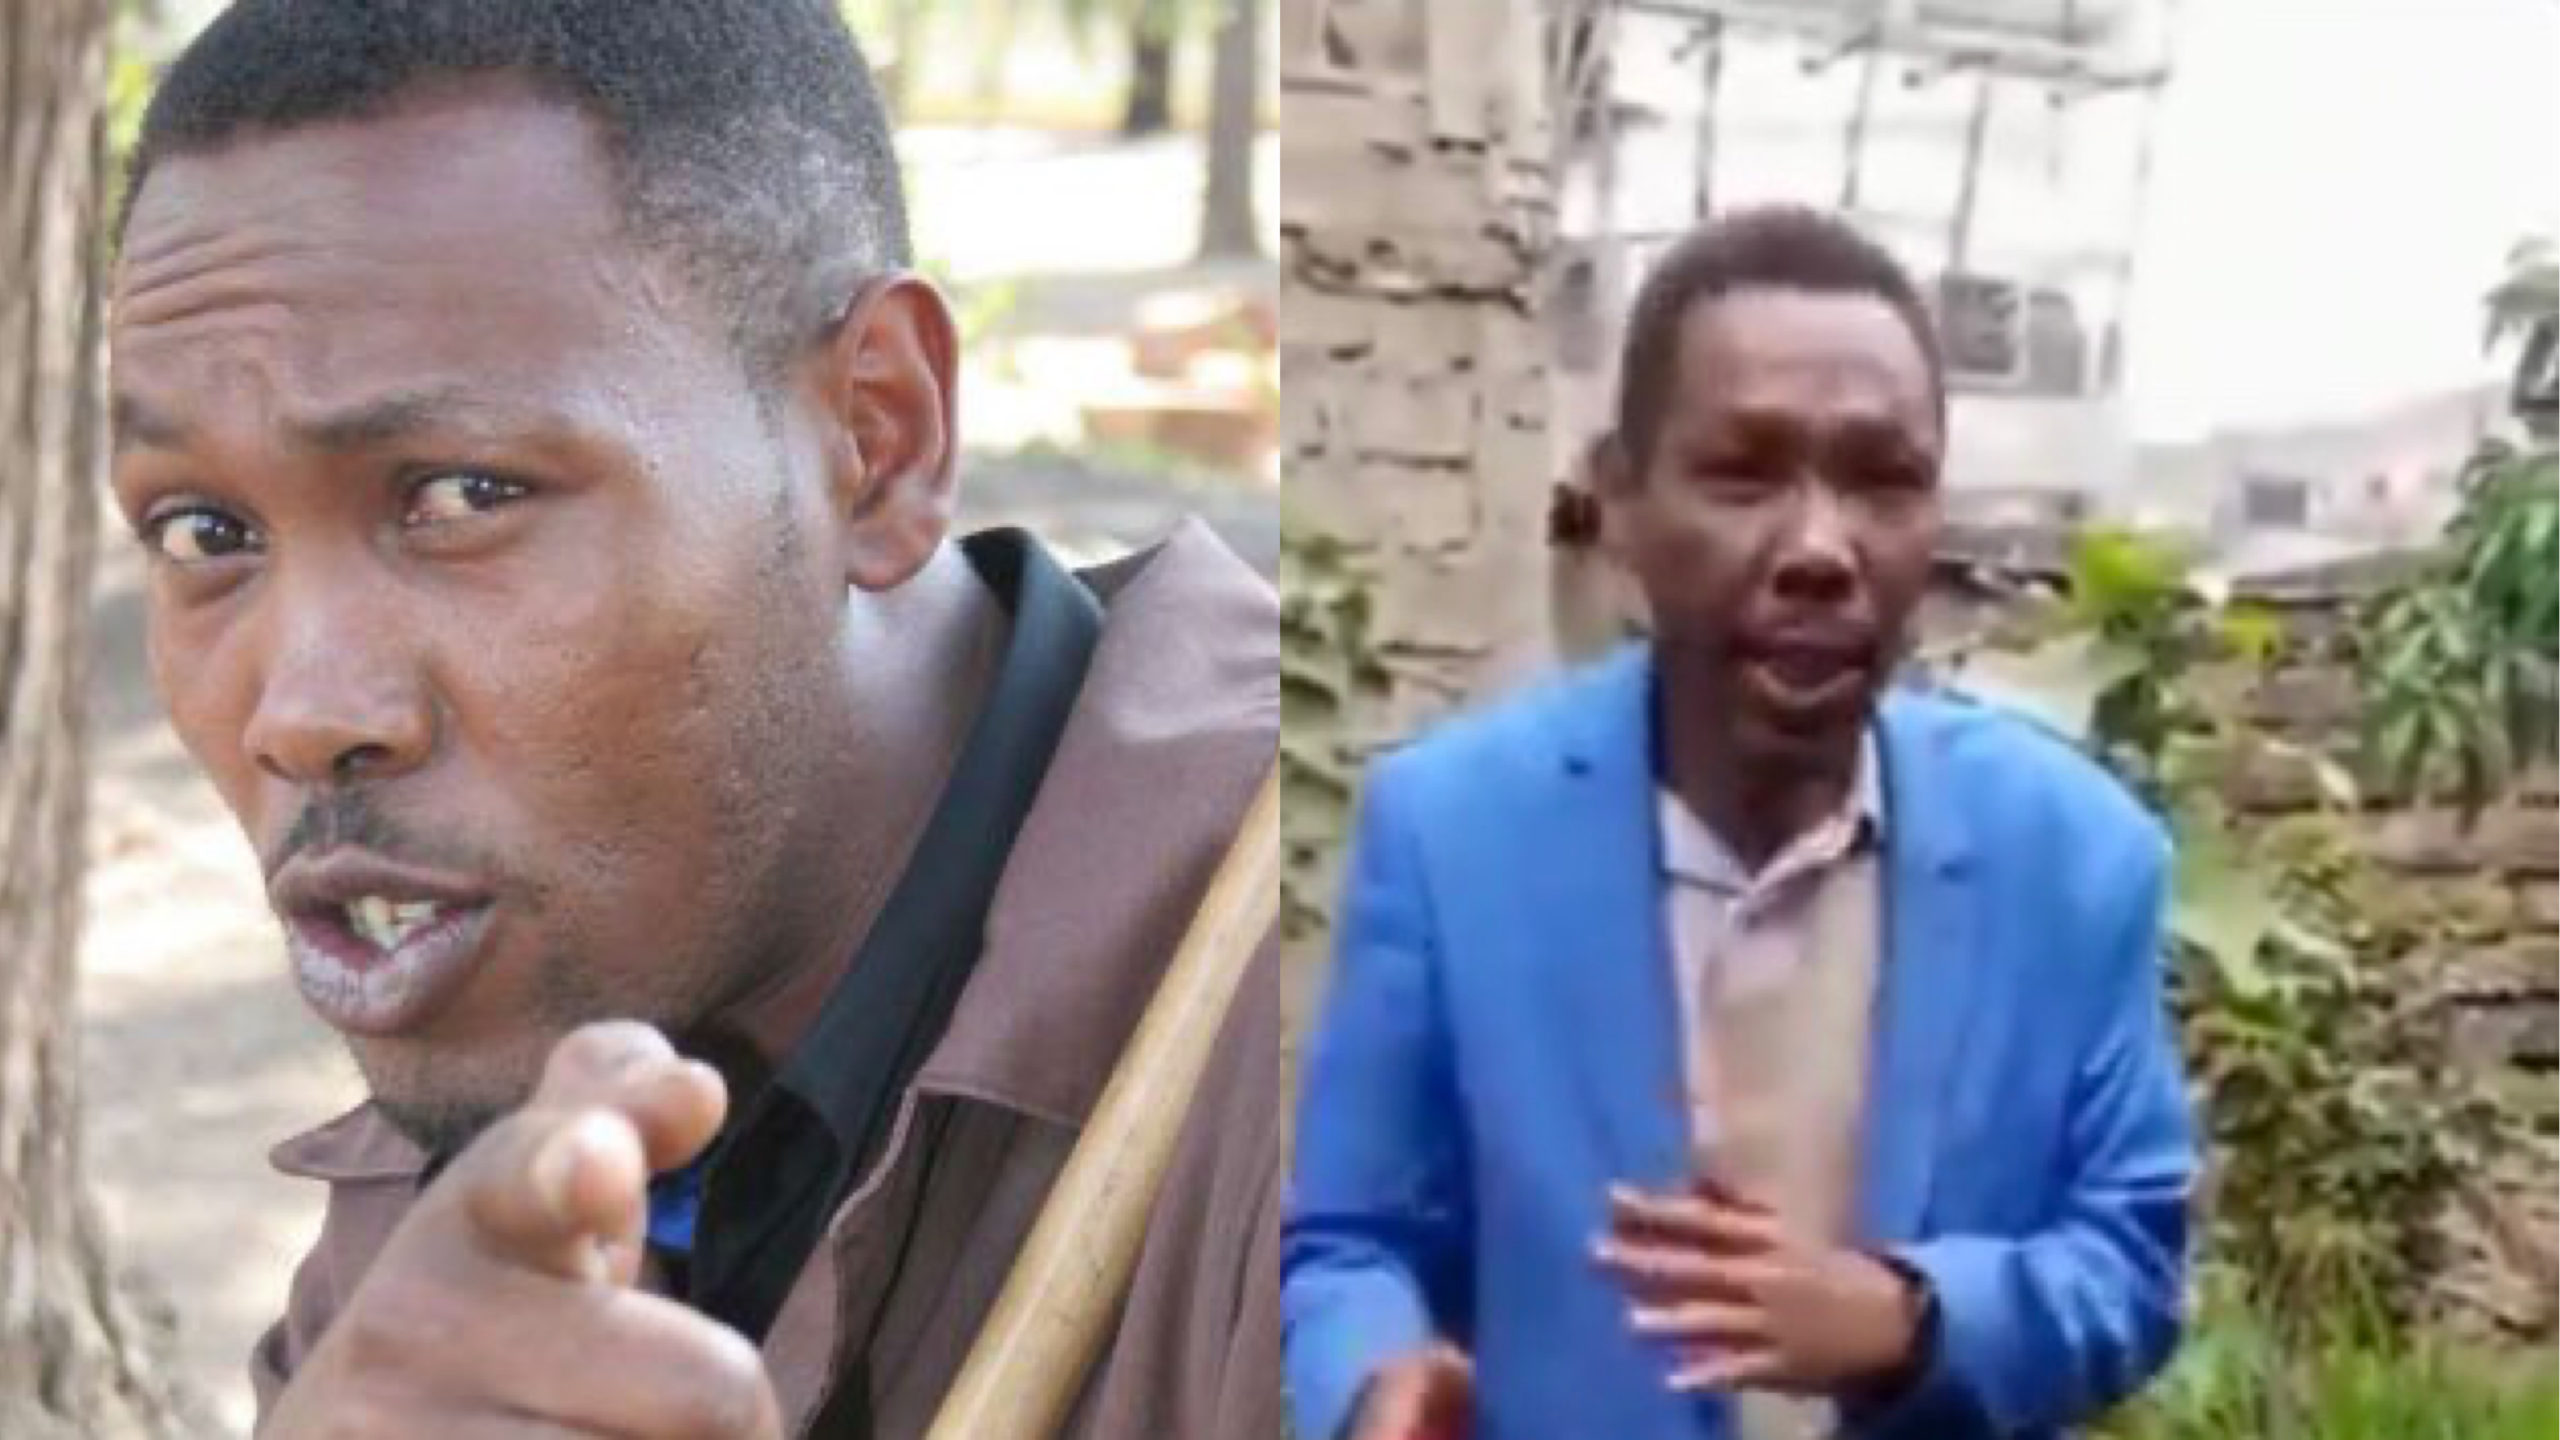 “Tukutoe lock?” Fans react after a drunk dazed Omosh is caught on camera borrowing more funds